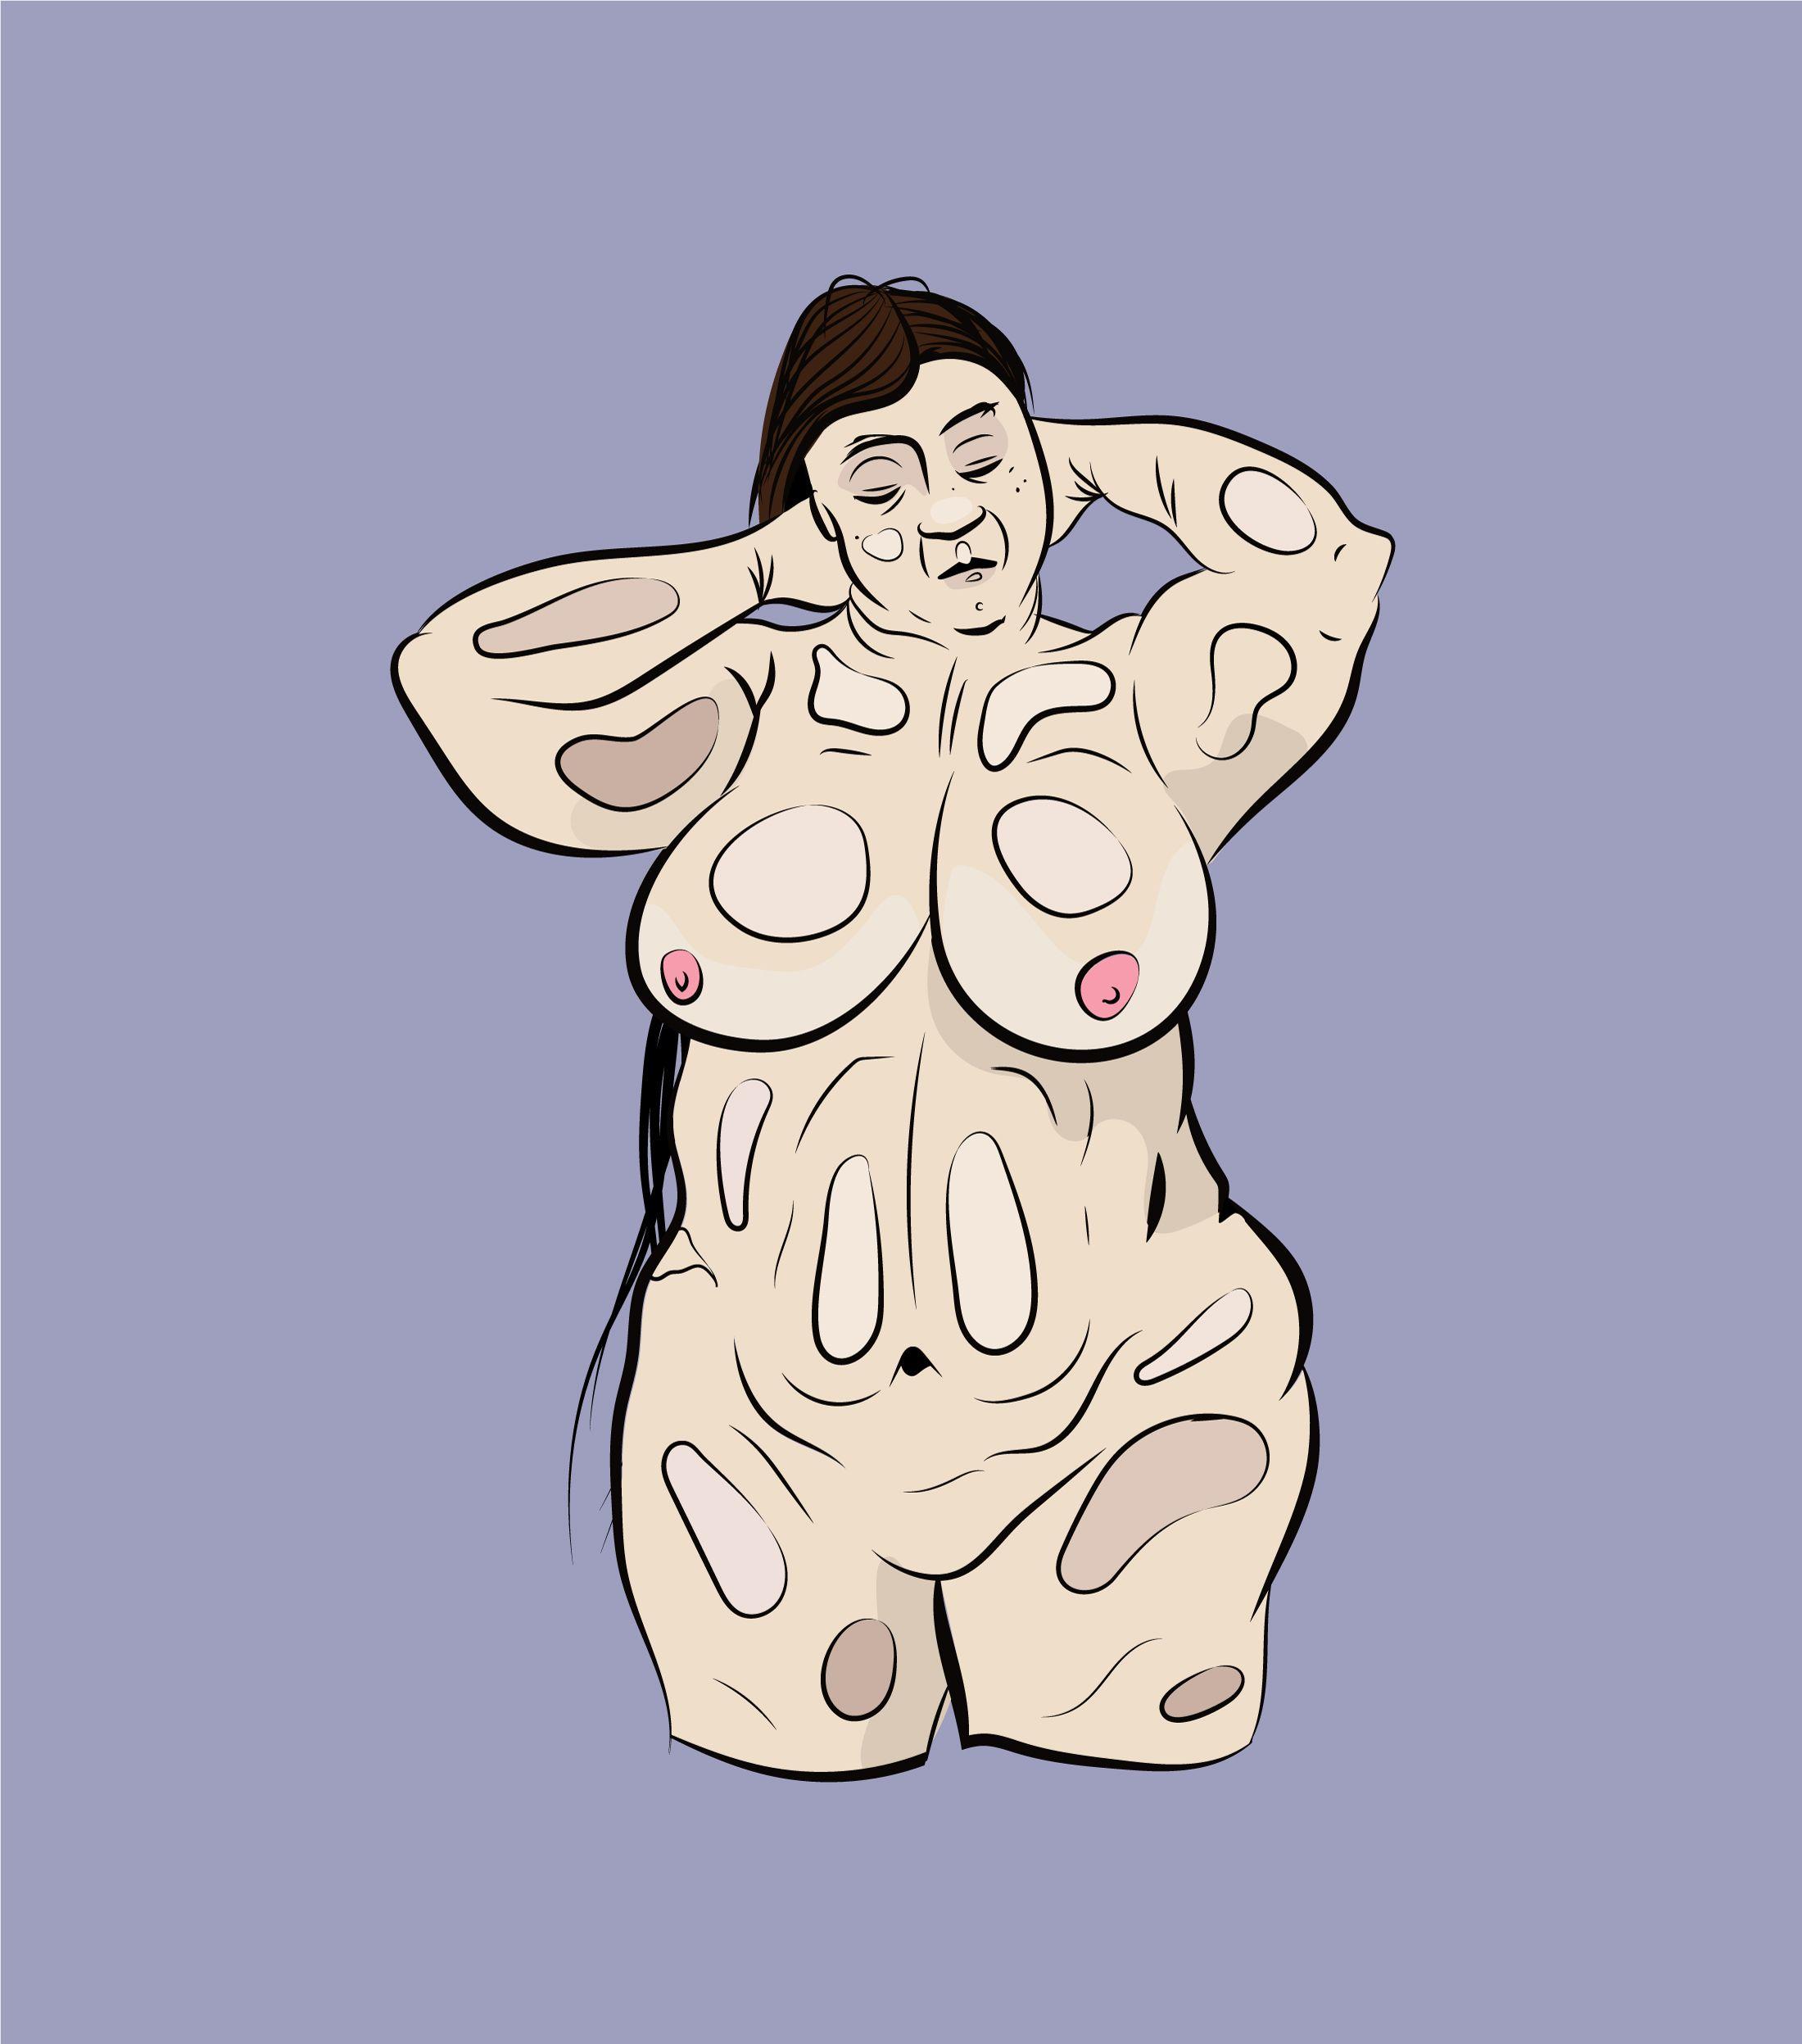 Digital art illustration of a naked obese lady on a purple background. The subjecct appears in the middle of the image holding her hair back almost posing sexually. She is comfortable with her body and sezxuallity.